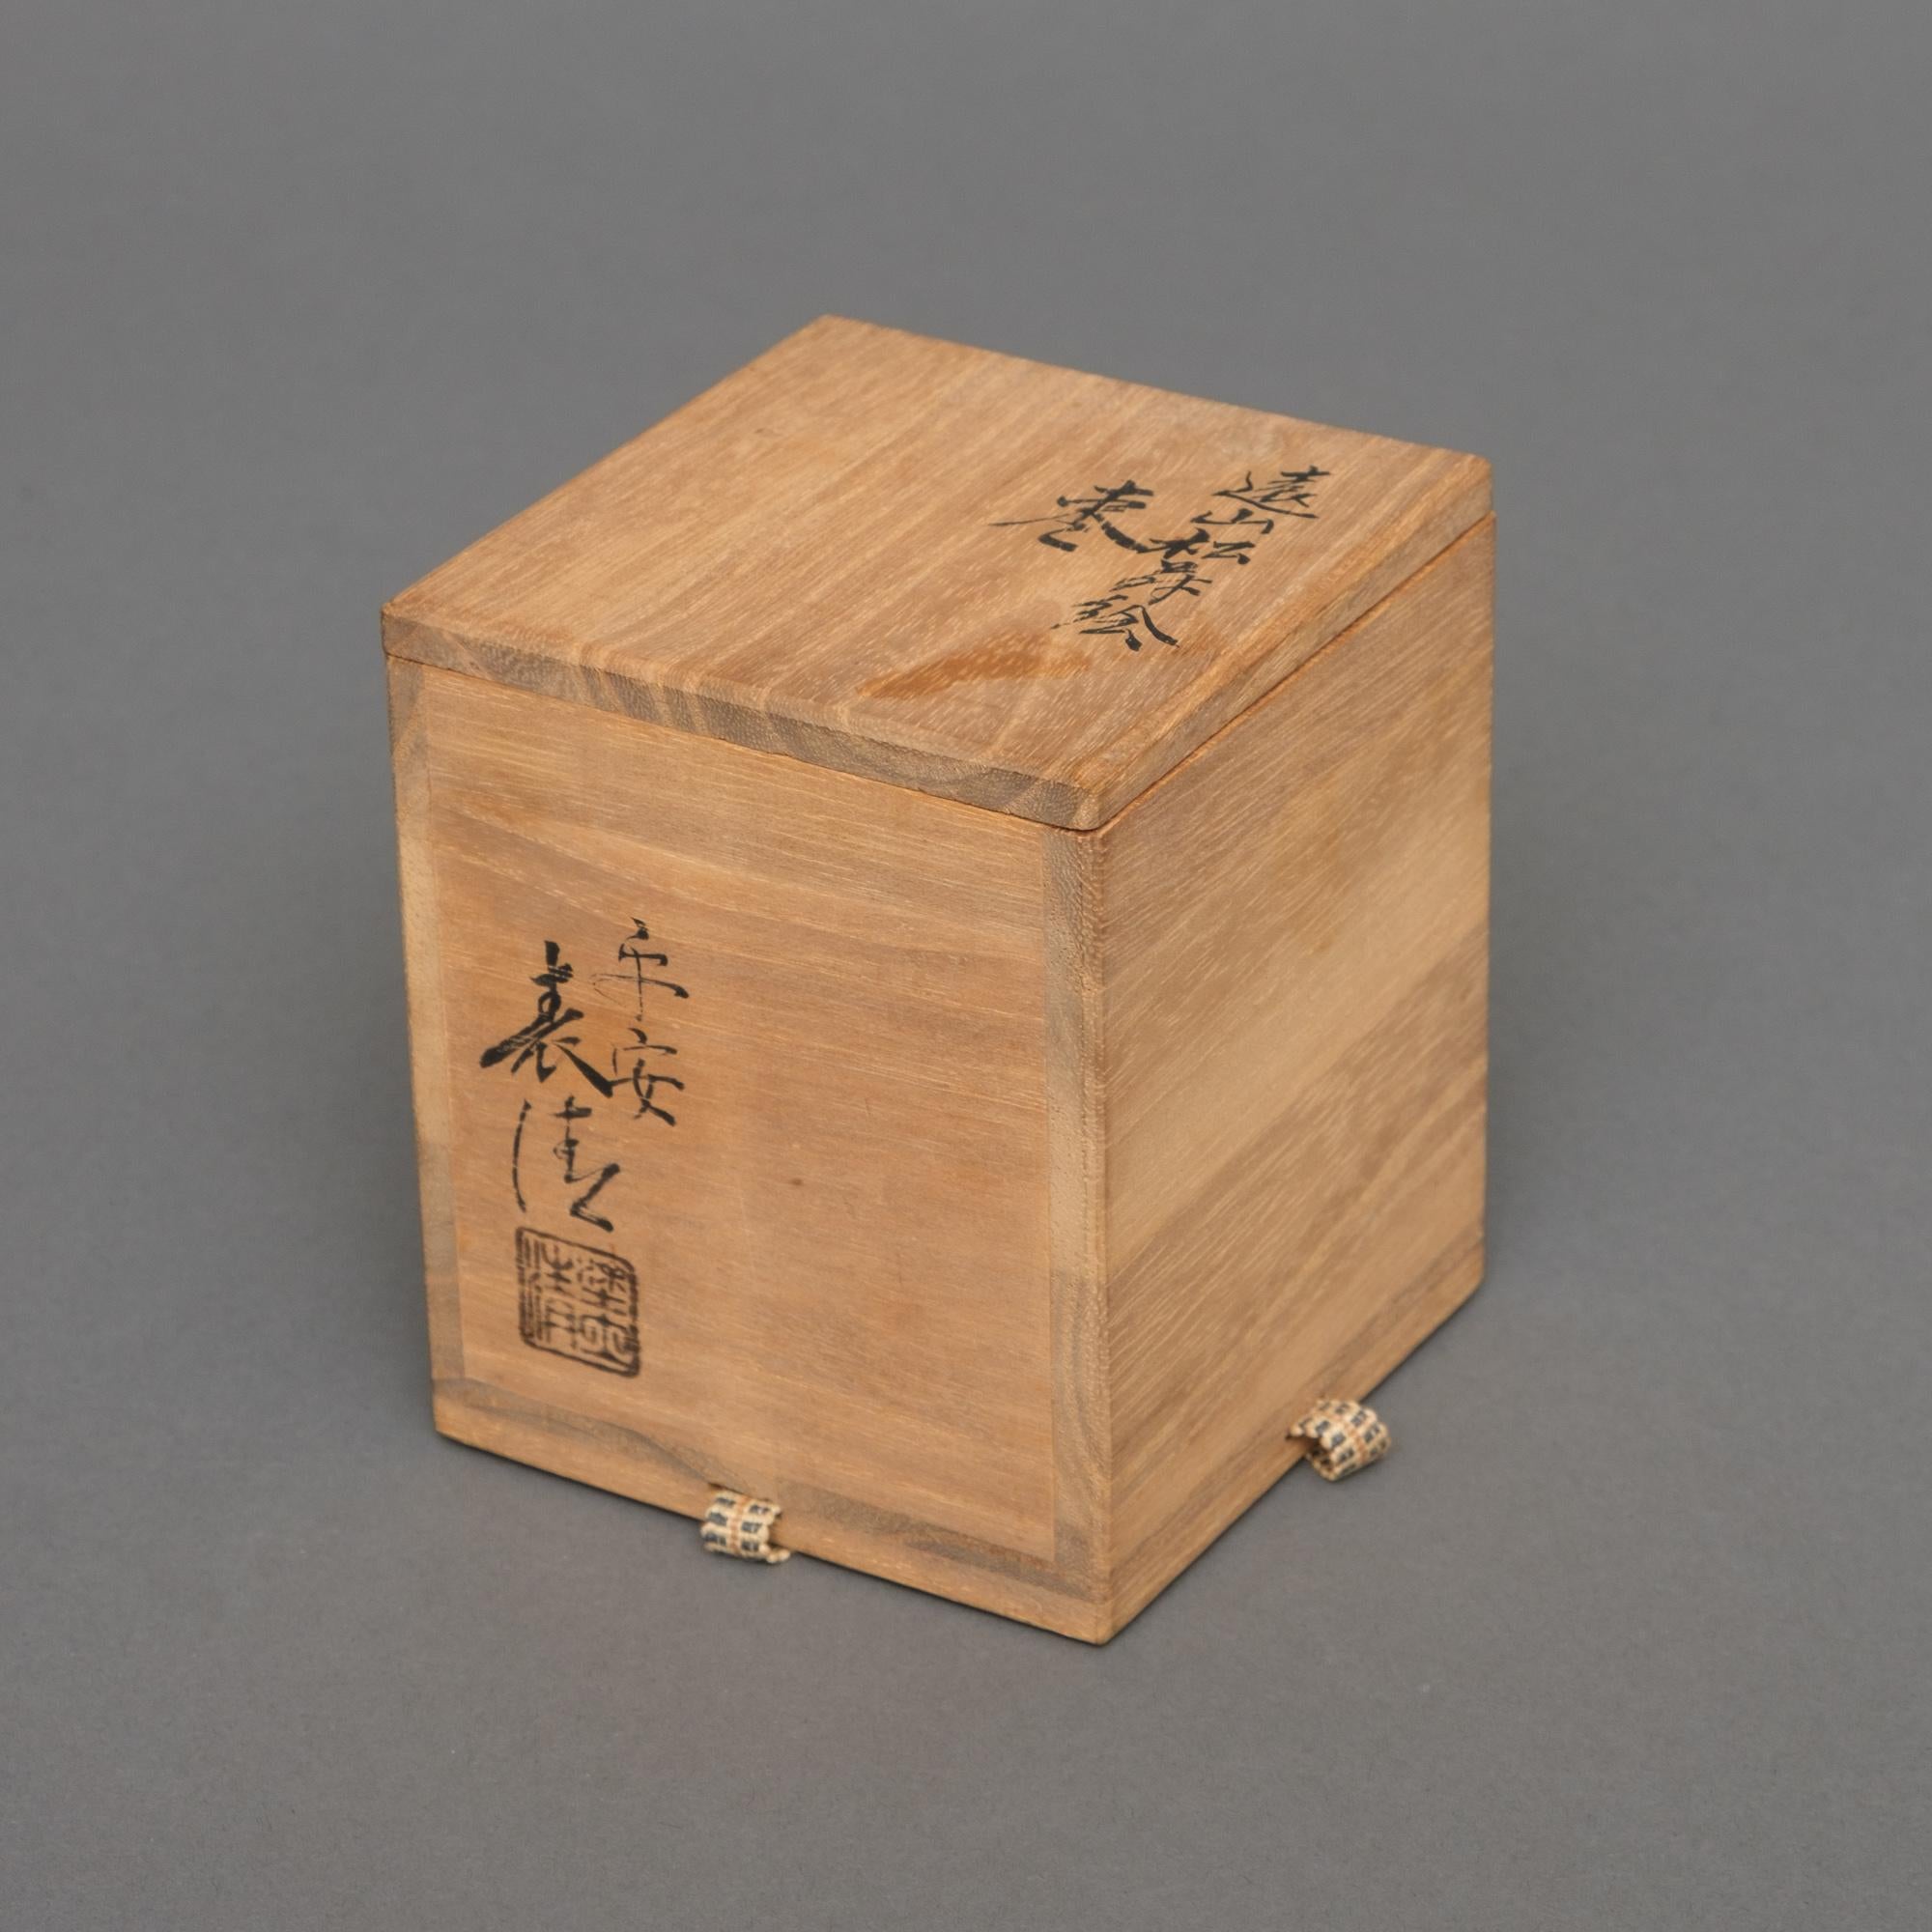 Japanese lacquer tea caddy 棗 (natsume) showcasing a pine tree forest For Sale 4